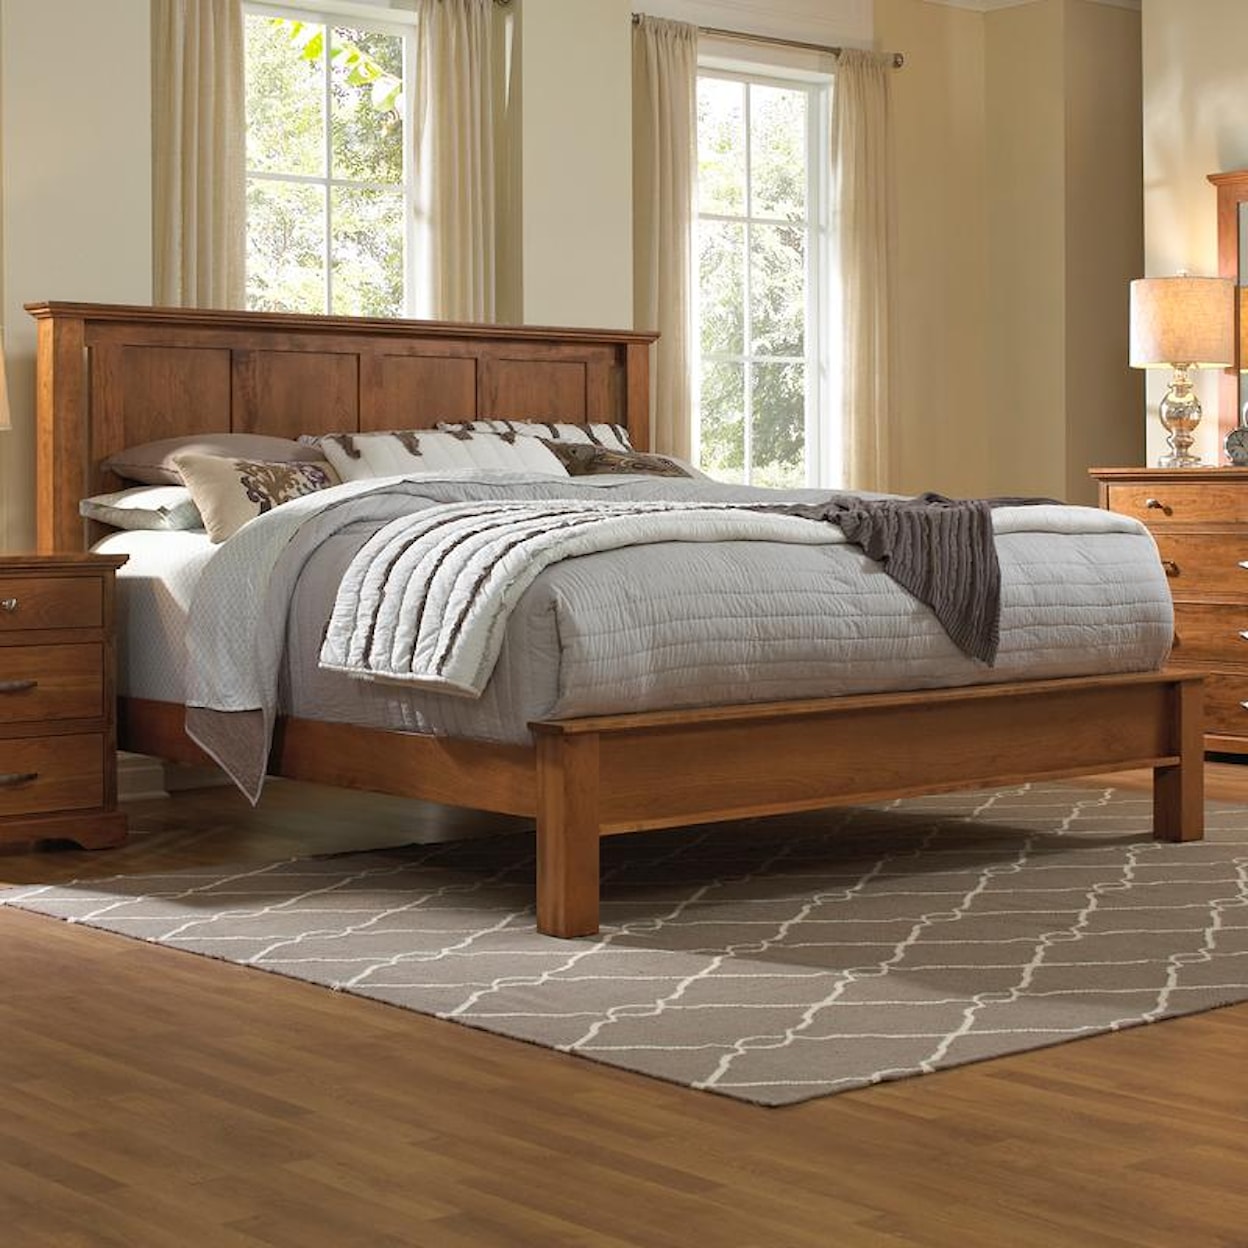 Daniel's Amish Elegance Solid Wood Queen Bed with Low Footboard